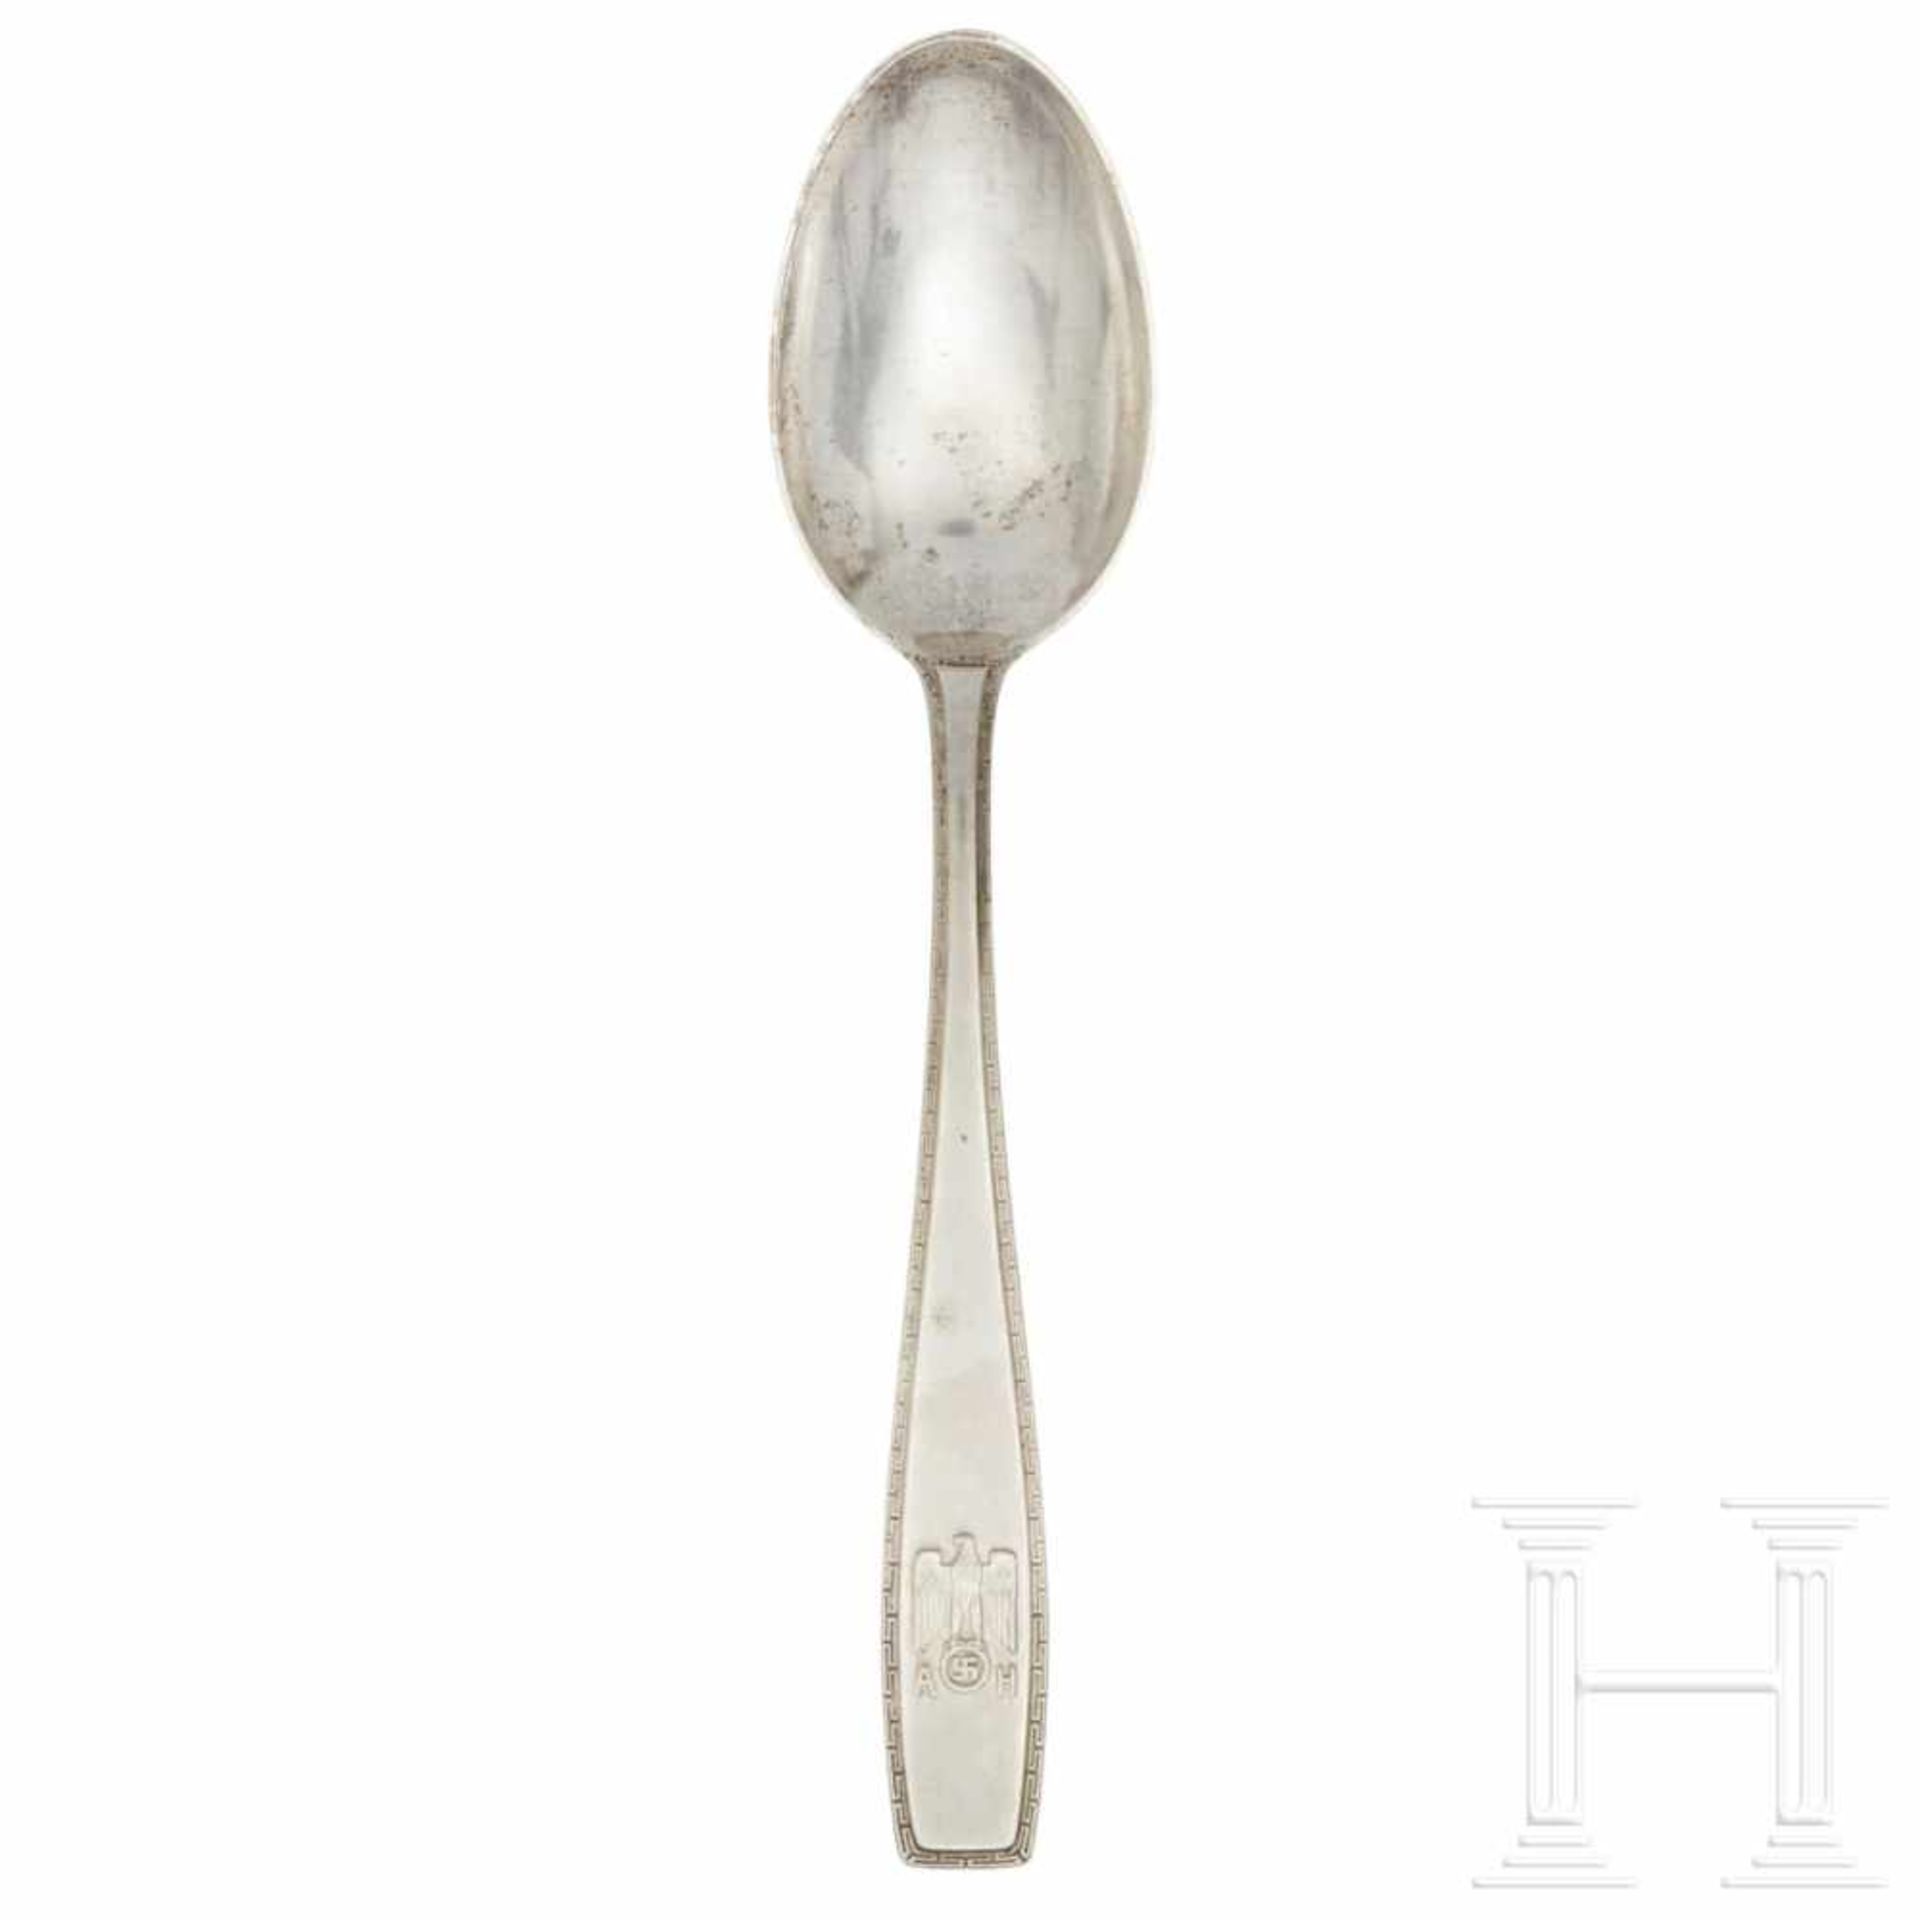 Adolf Hitler – a Dinner Spoon from his Personal Silver ServiceSo called “formal pattern” with raised